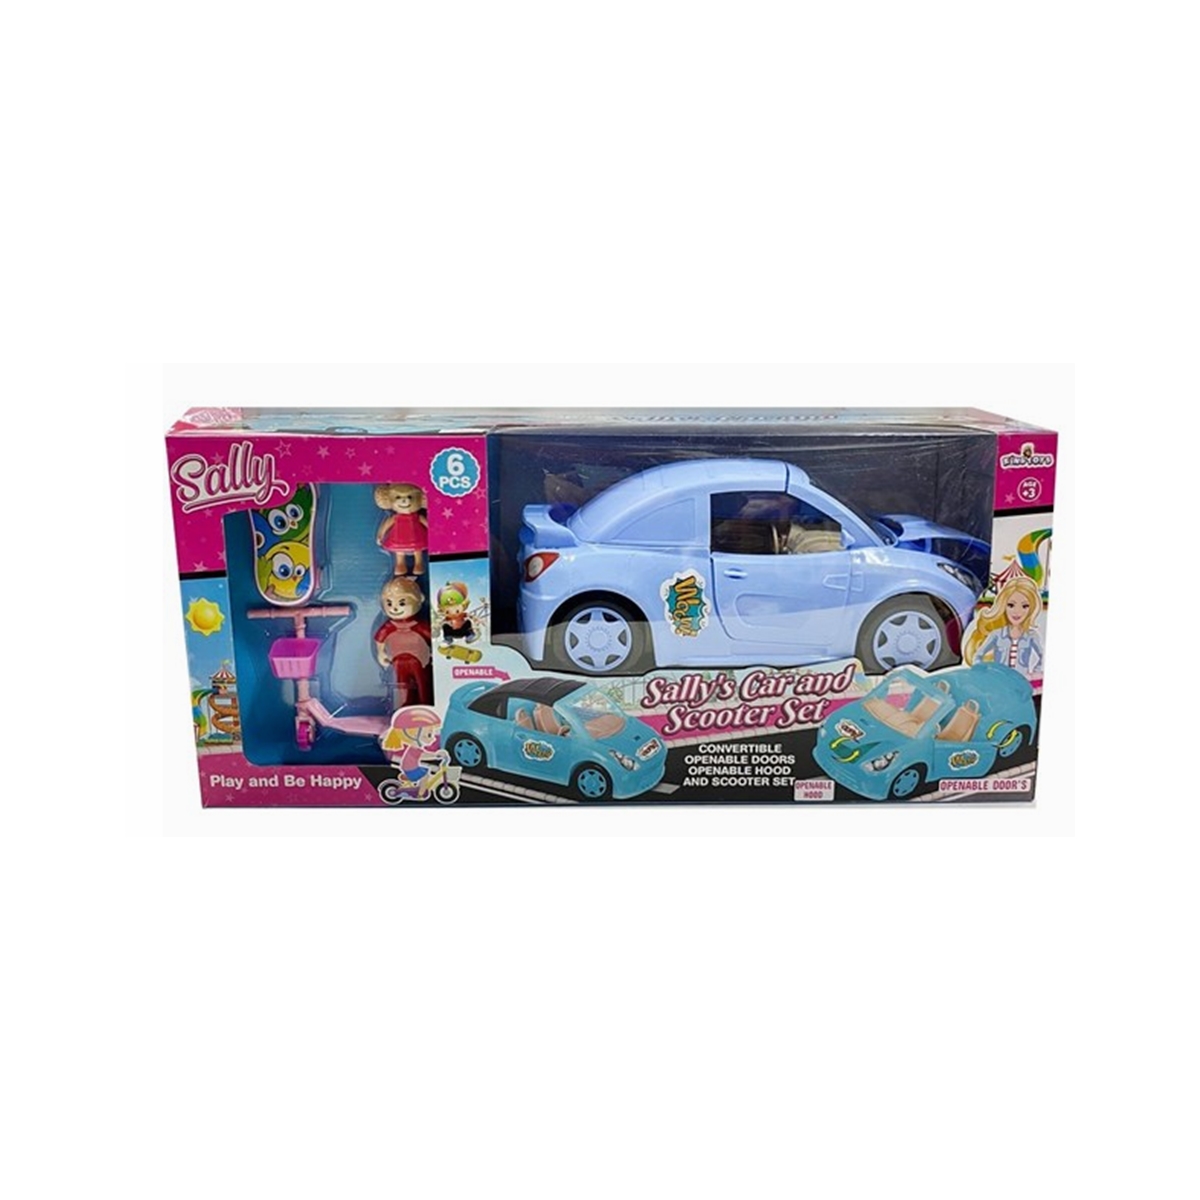 King%20Toys%20ENG1138%20Sallys%20Car%20And%20Scooter%20Set